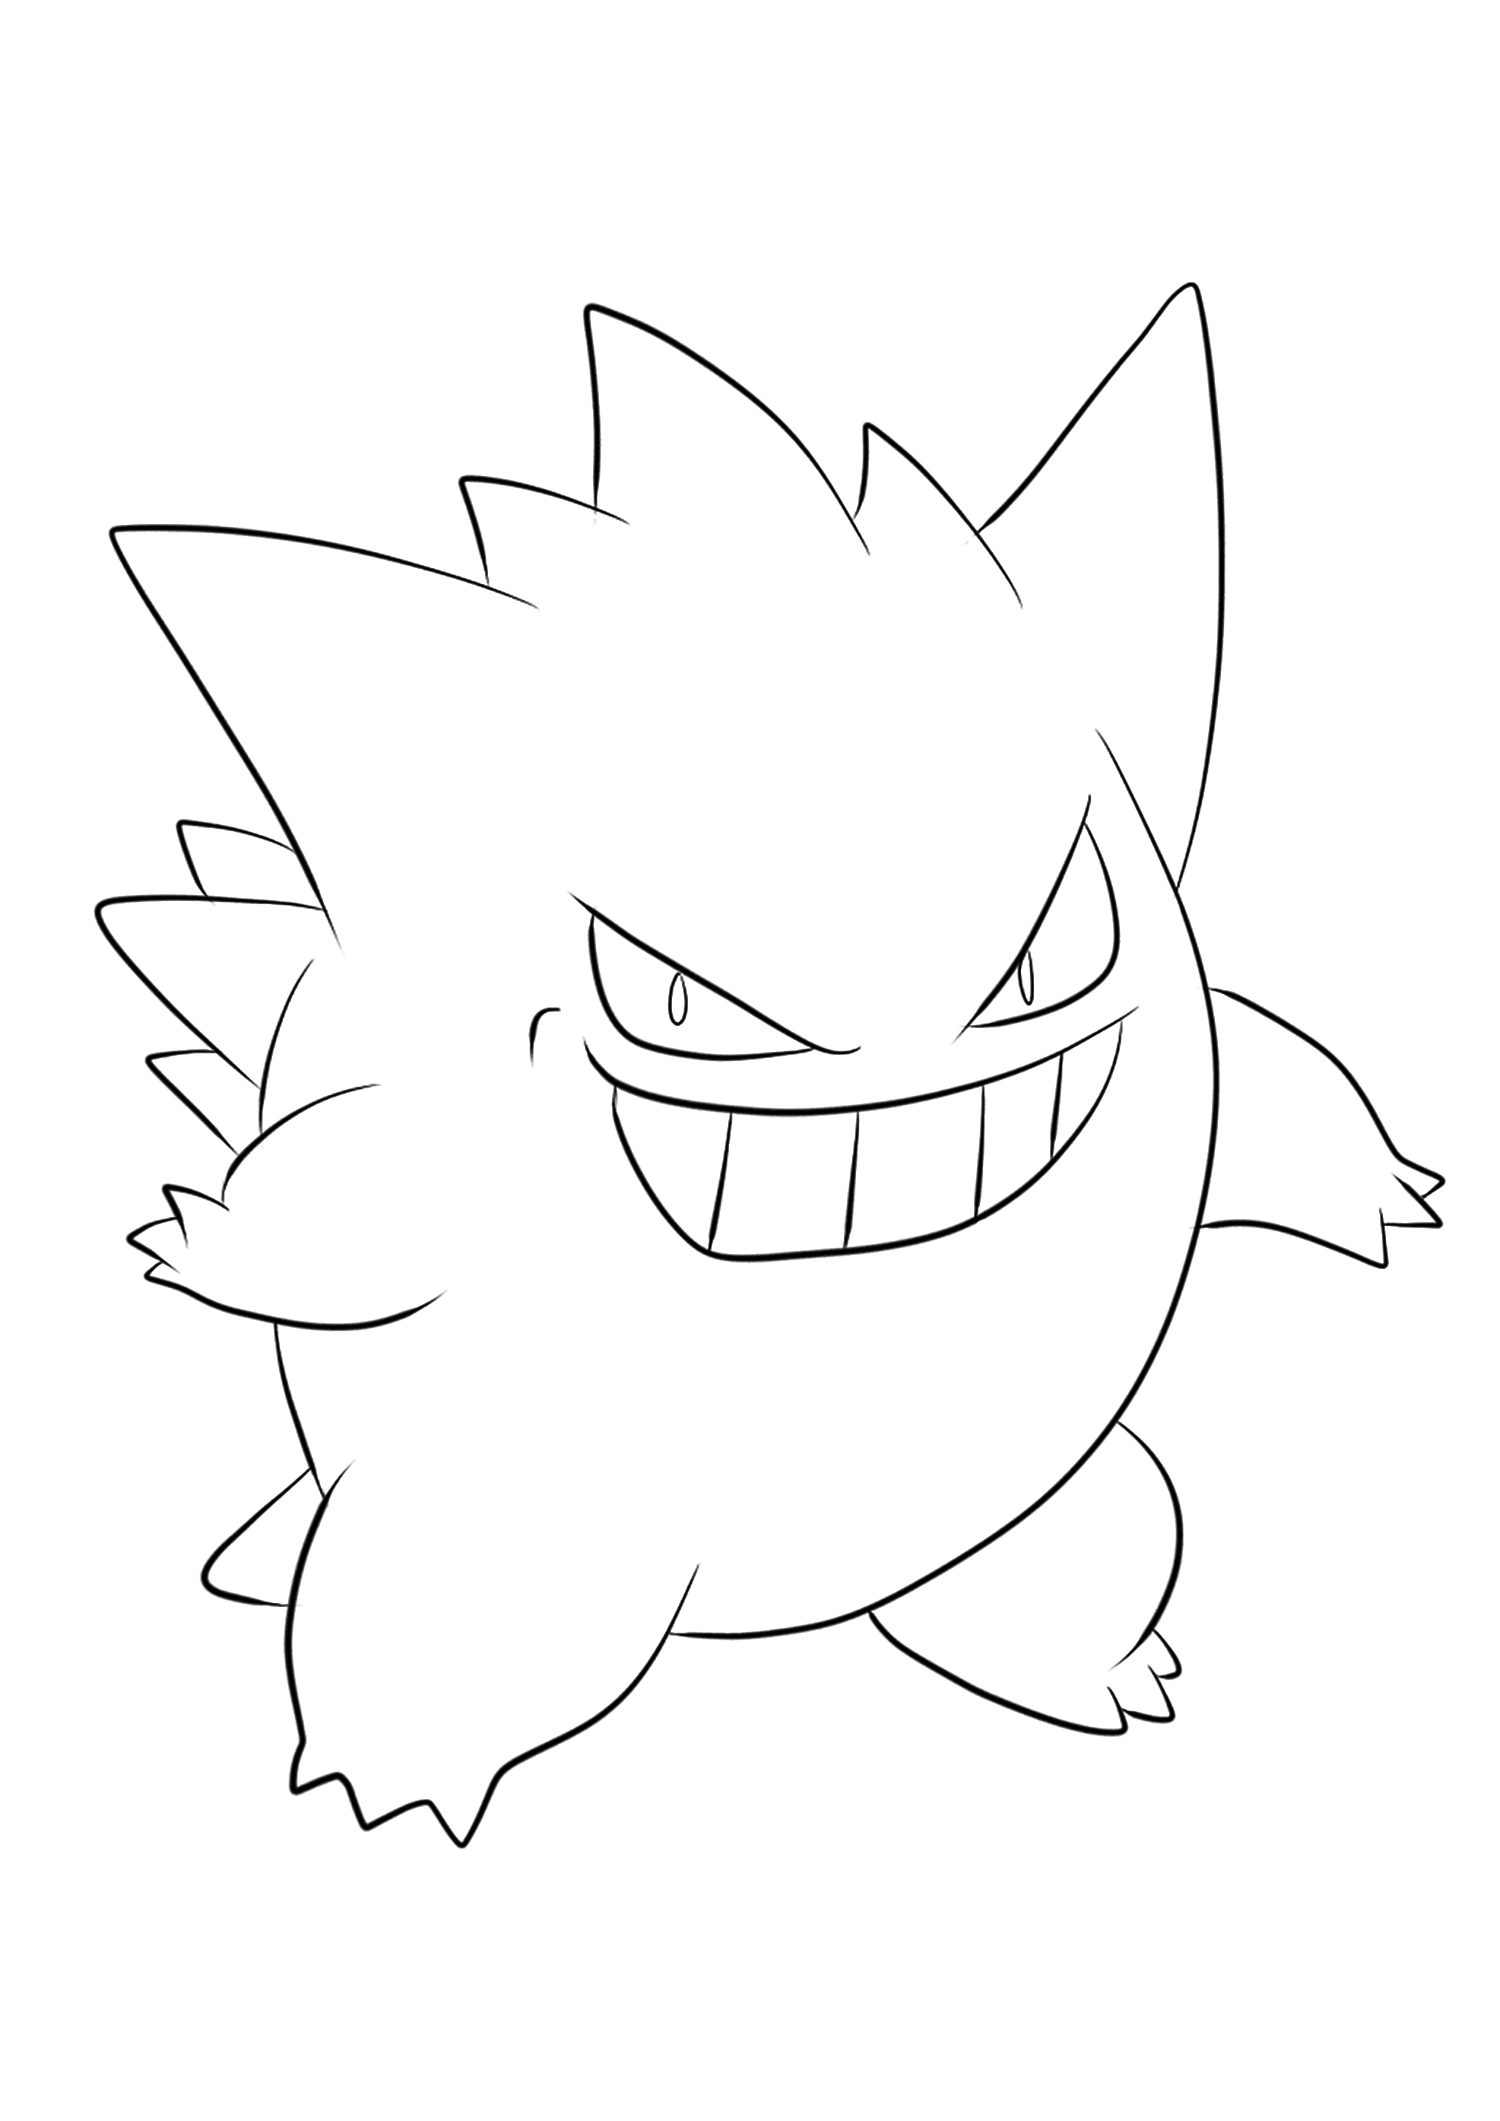 Gengar (No.94). Gengar Coloring page, Generation I Pokemon of type Ghost and PoisonOriginal image credit: Pokemon linearts by Lilly Gerbil on Deviantart.Permission:  All rights reserved © Pokemon company and Ken Sugimori.